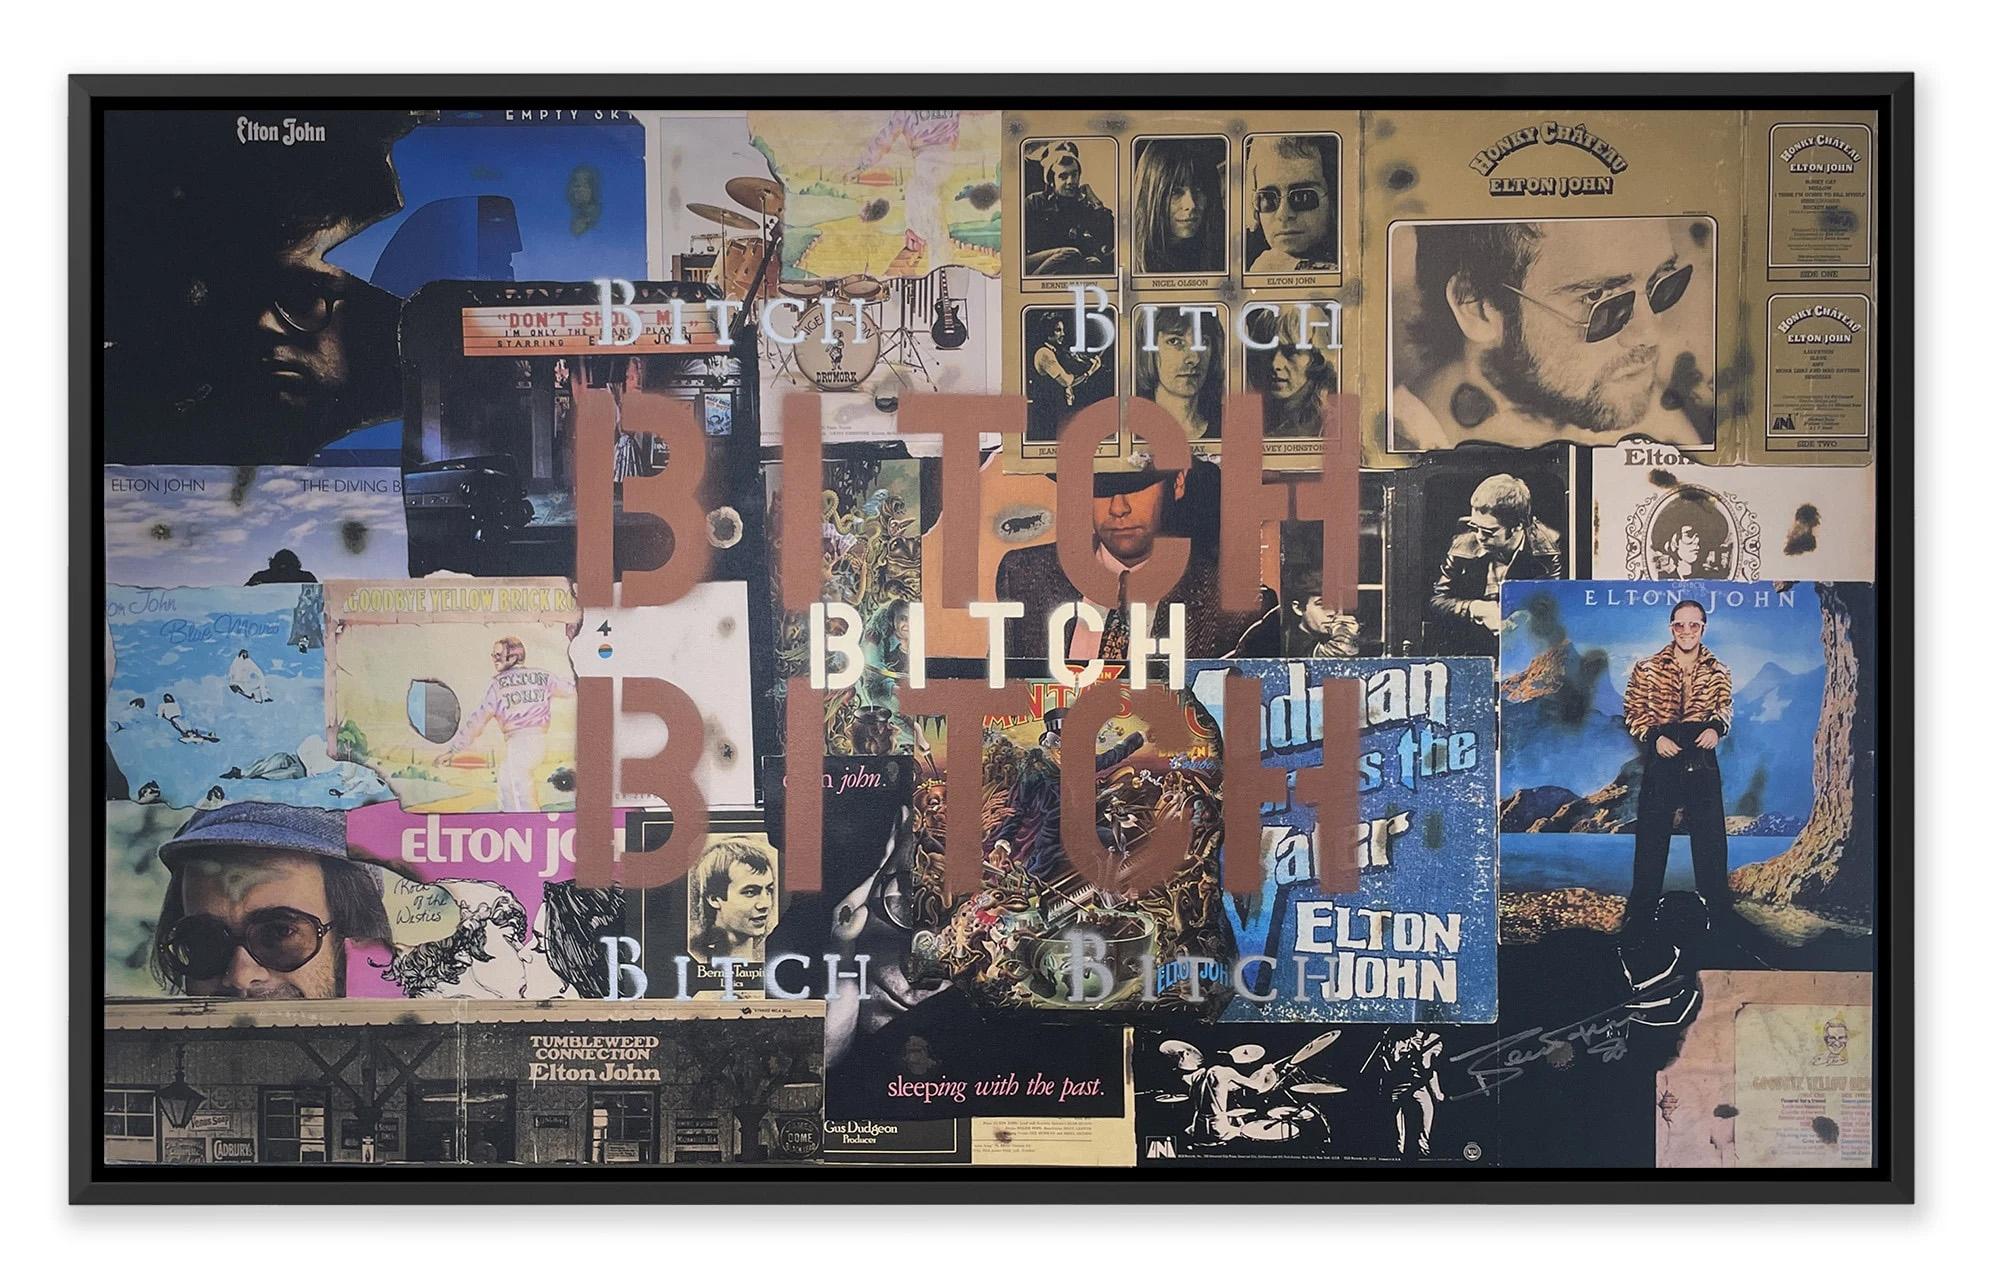 MEDIUM: Hand-embellished monotype on canvas
IMAGE SIZE: 25" x 41.5"
SKU: BT0014

Bernie Taupin's views art as a visual extension of his song lyrics. Inspired by The Bitch is Back,” released in 1974.